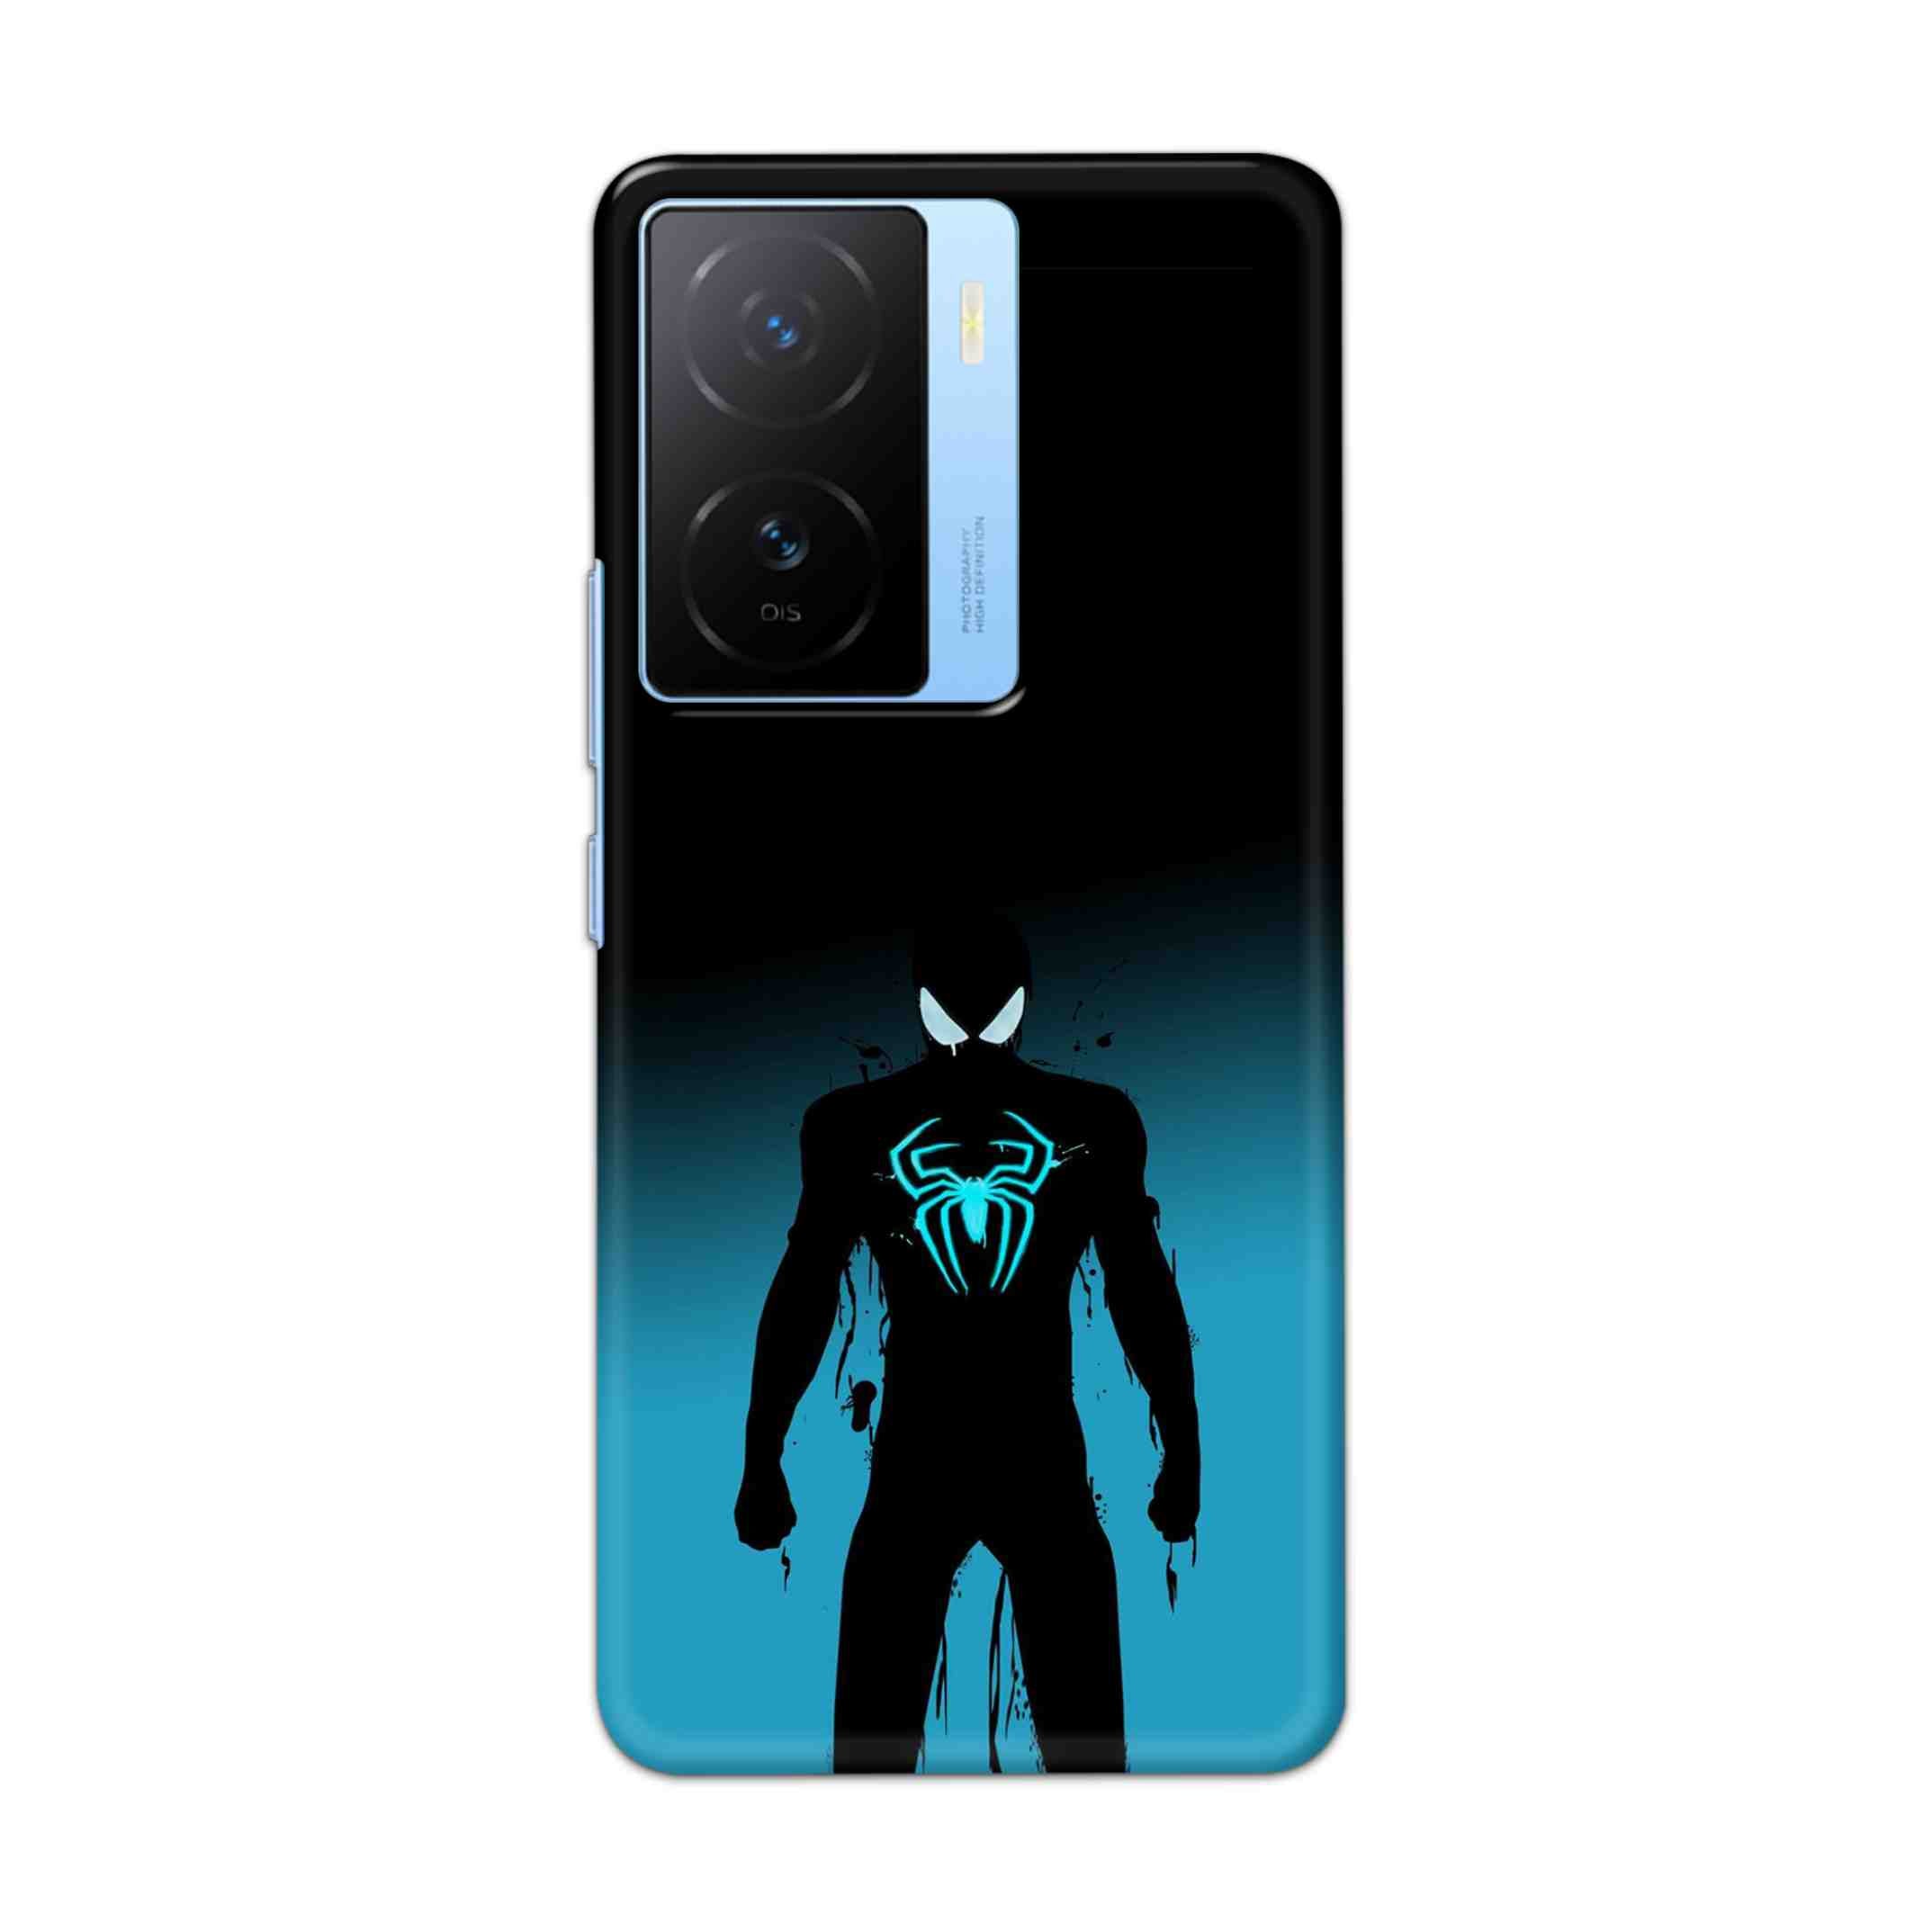 Buy Neon Spiderman Hard Back Mobile Phone Case/Cover For iQOO Z7s Online